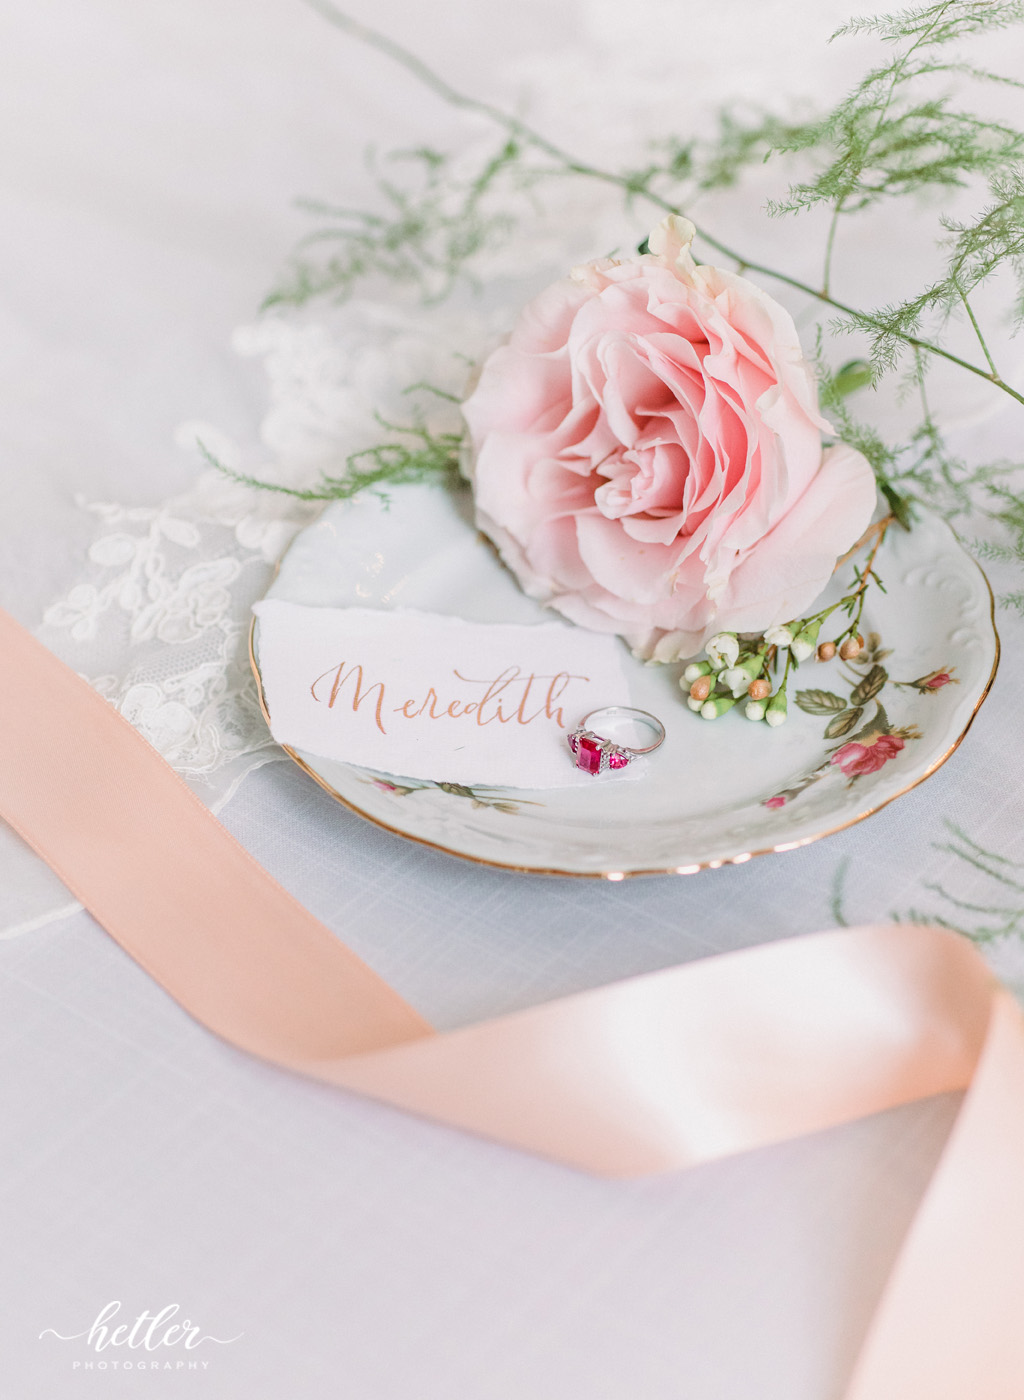 The Lit GR wedding with romantic Valentine's Day inspiration